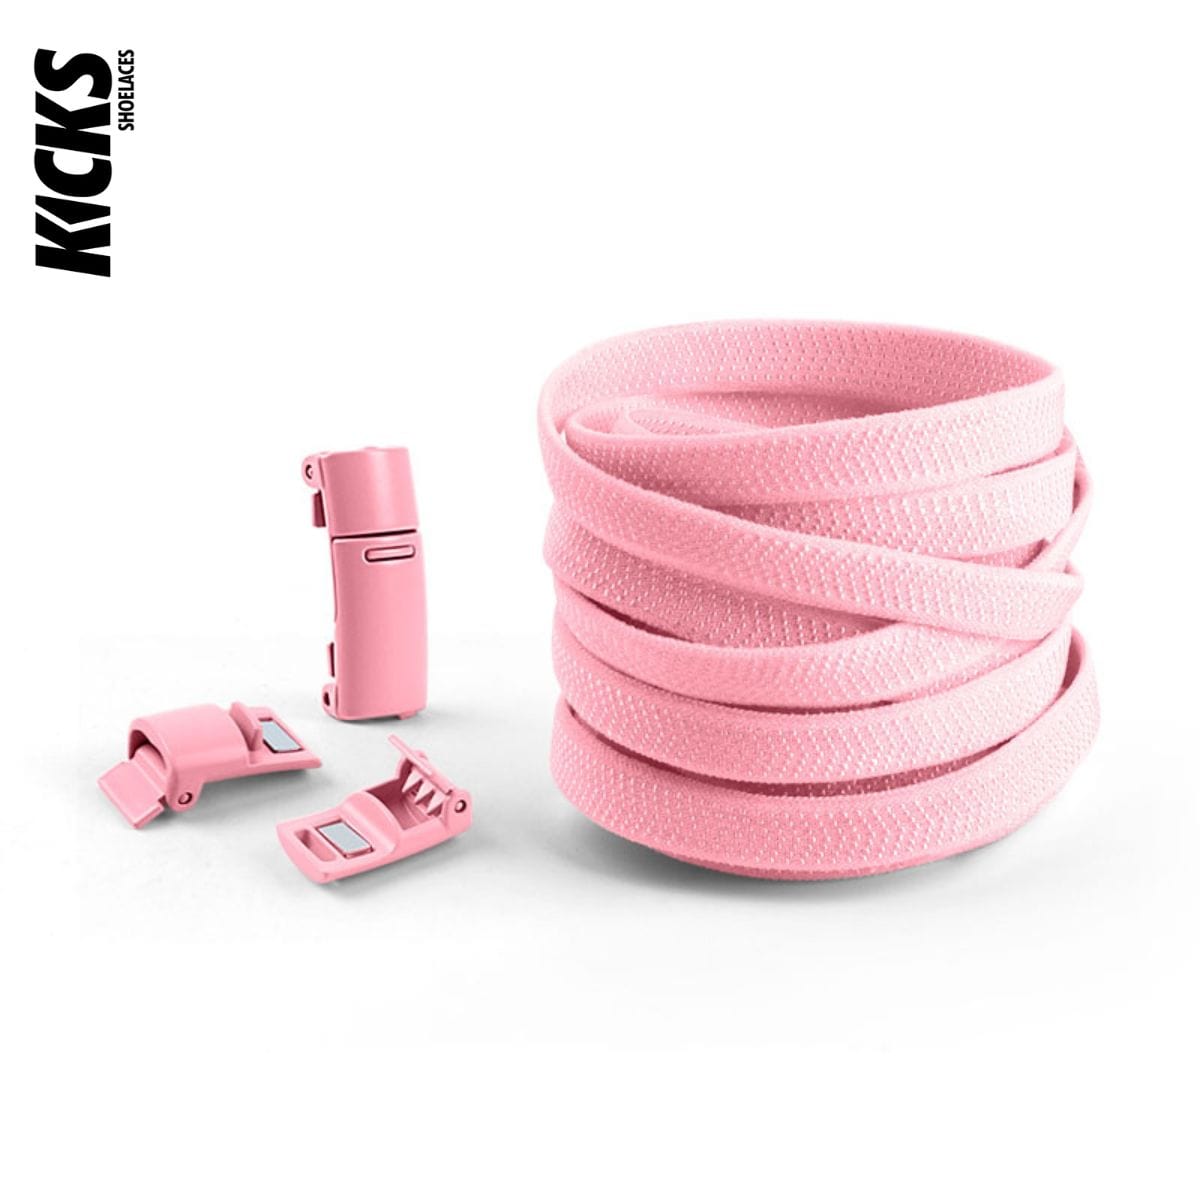 Pink No-Tie Shoelaces with Magnetic Locks - Kicks Shoelaces